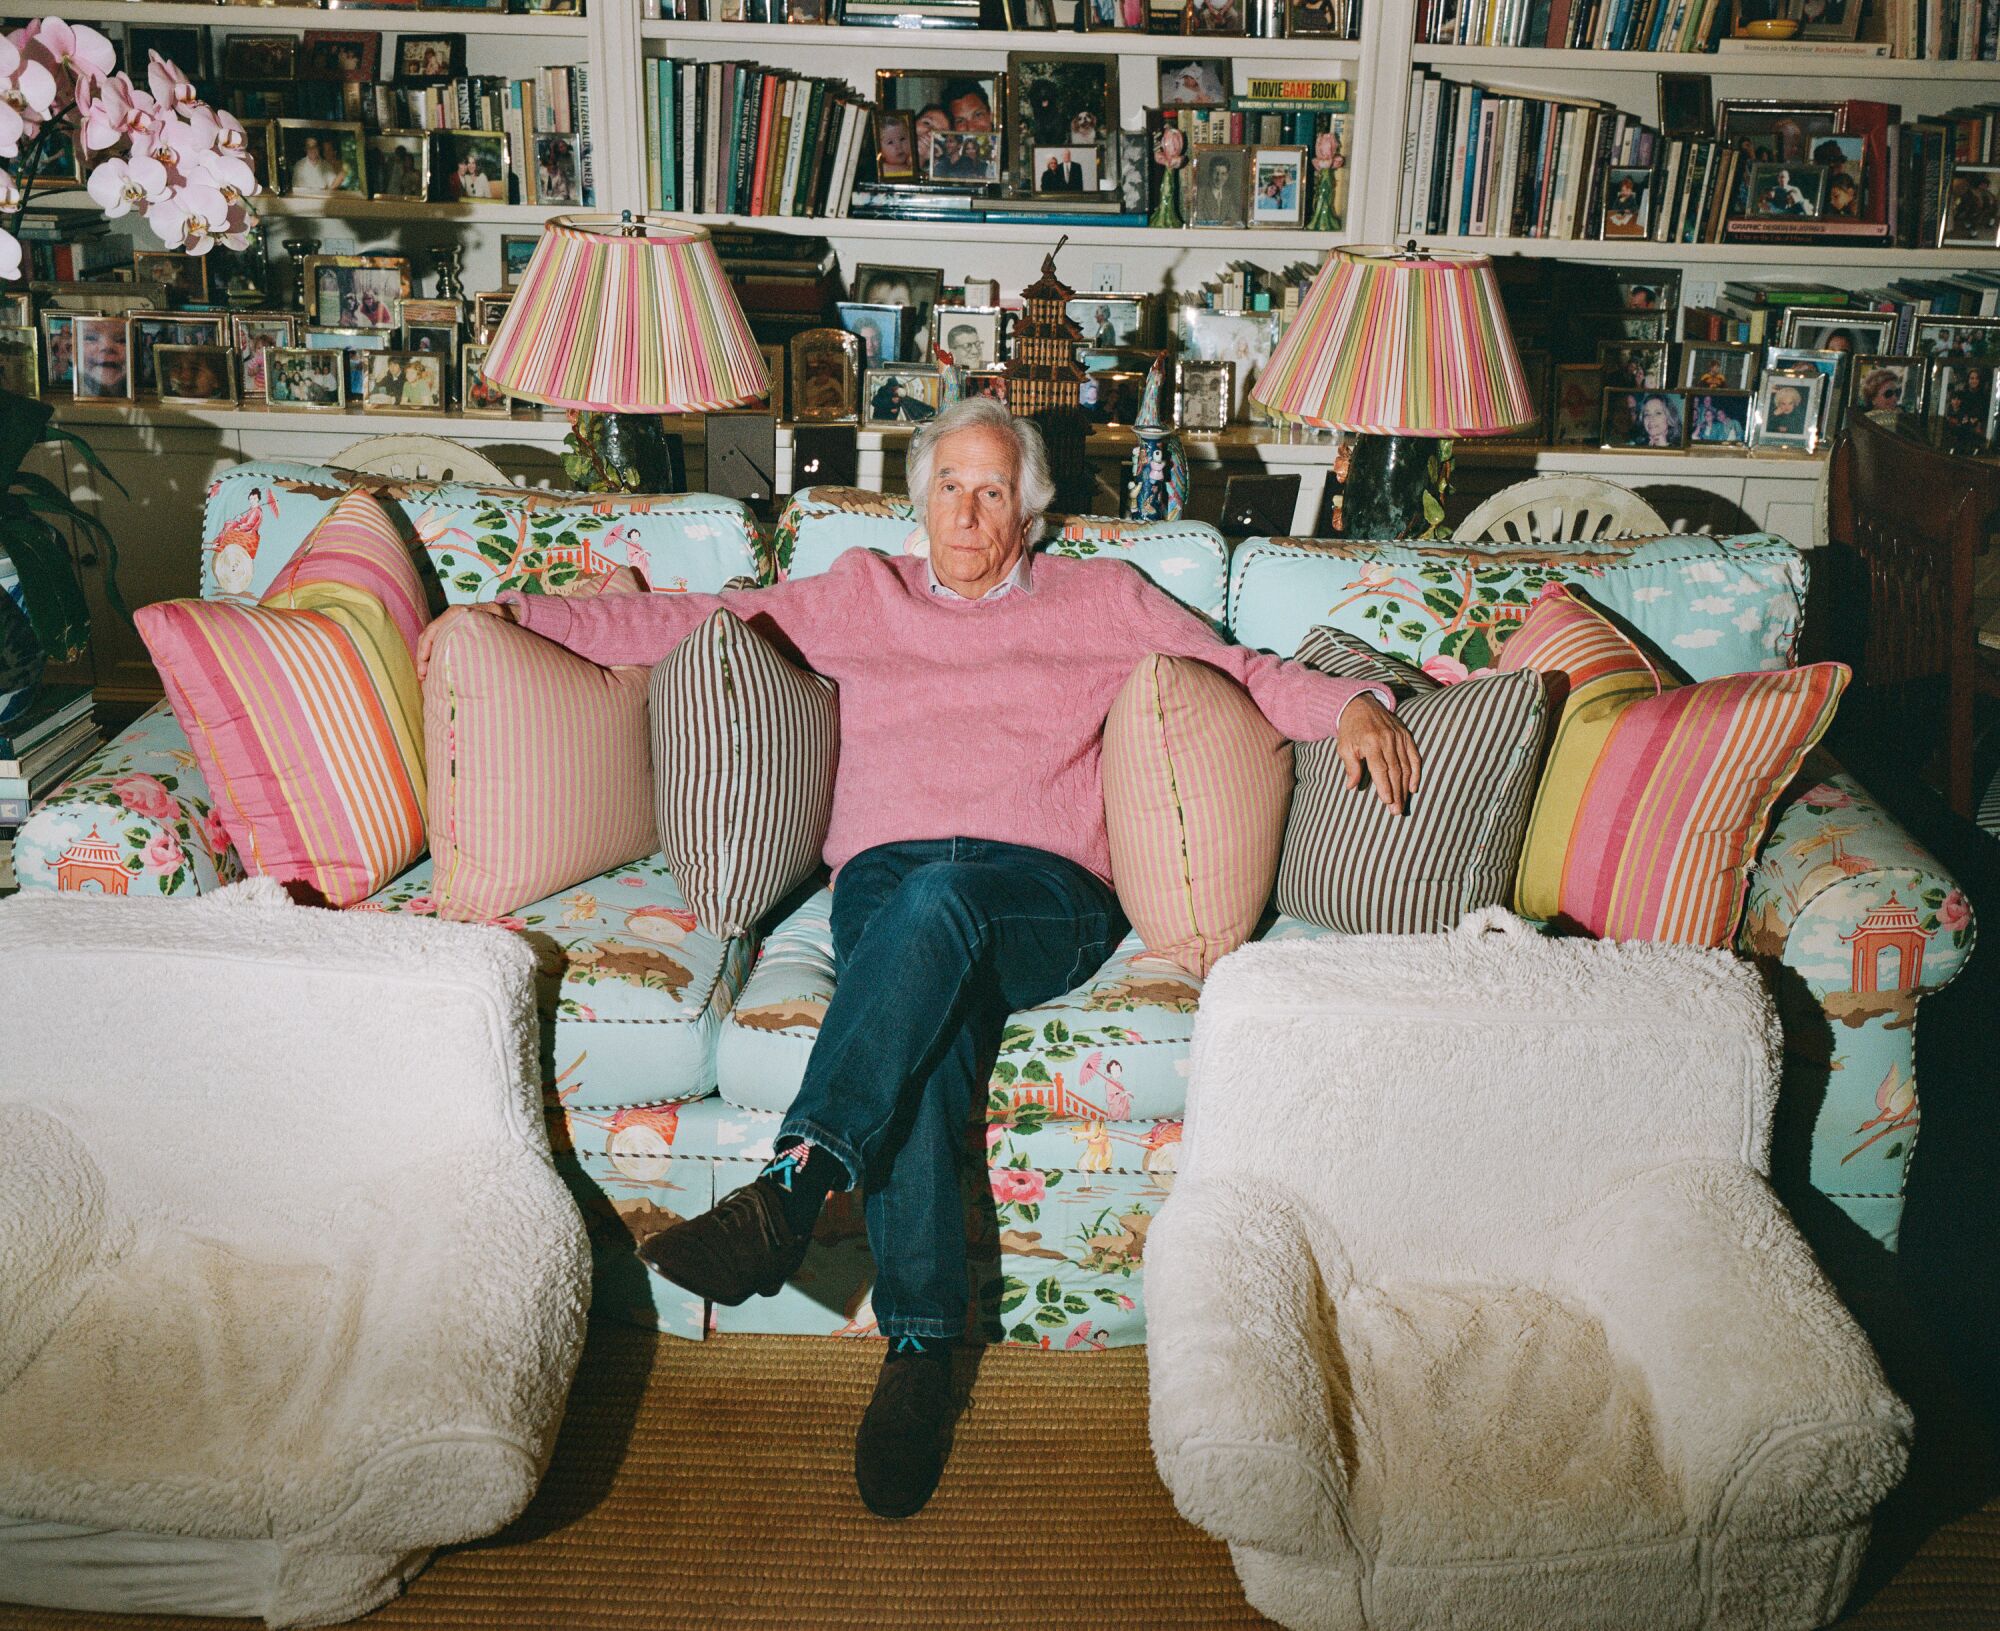 A man in a pink sweater sits on a blue floral couch with a lamp and fluffy white chairs on either side of him